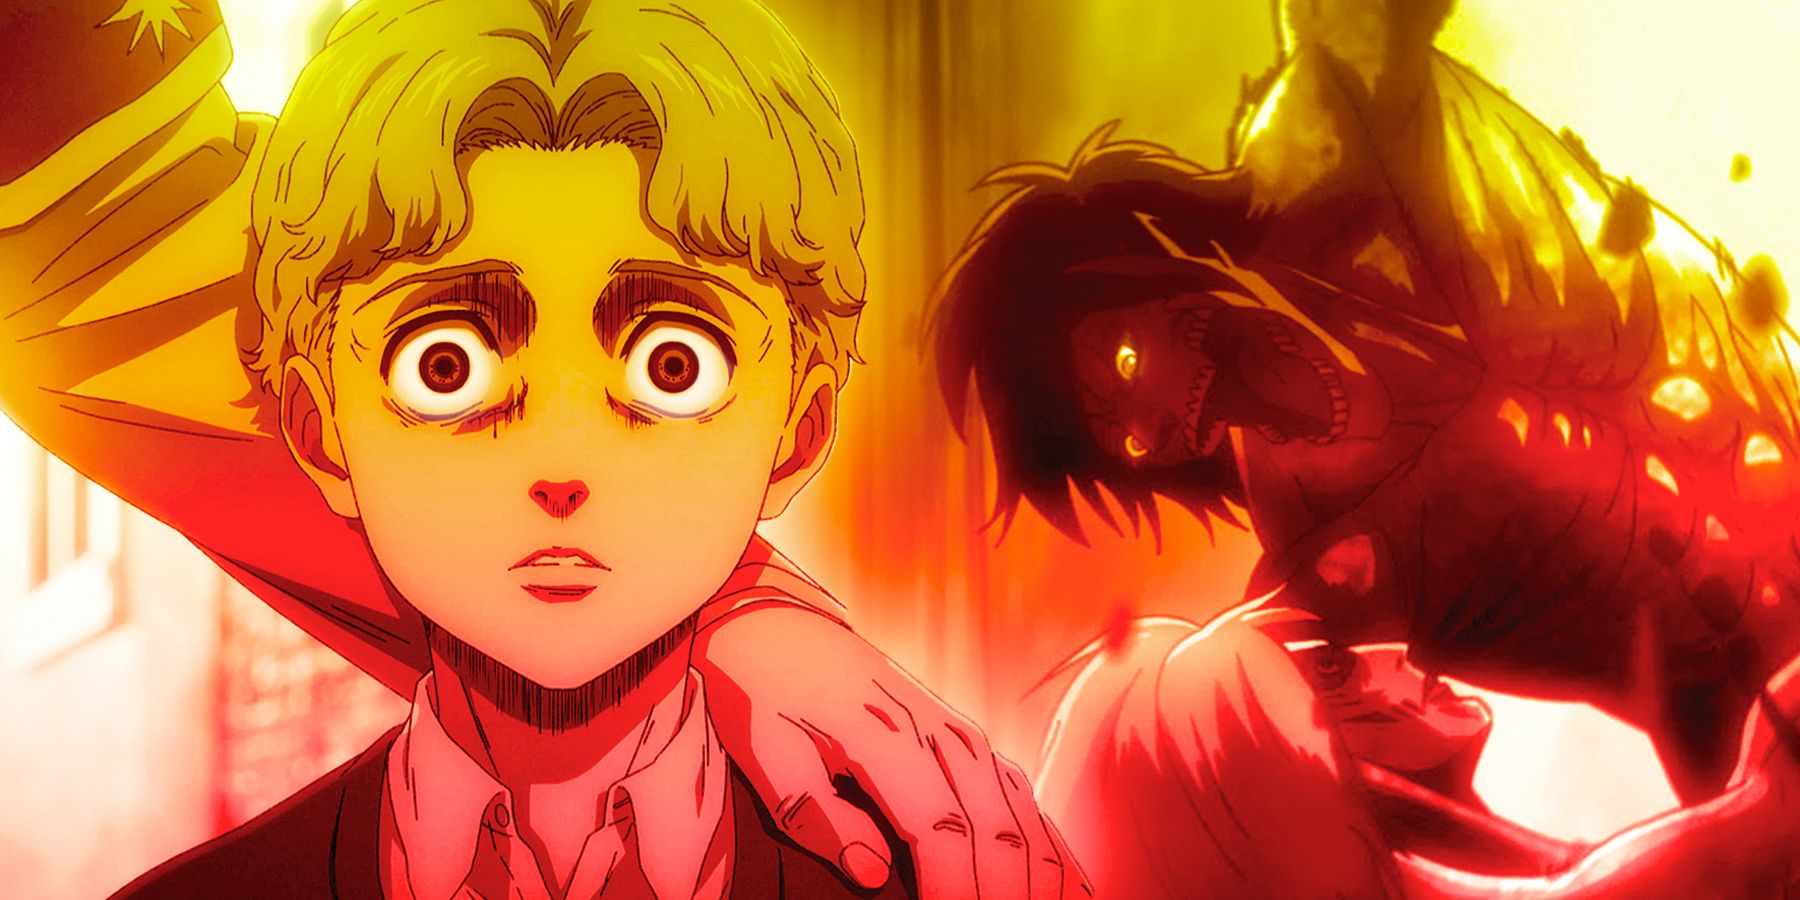 On the right, a young Zeke looks surprised and bewildered. On the right, Eren fights Annie in the forest, both in titan form.